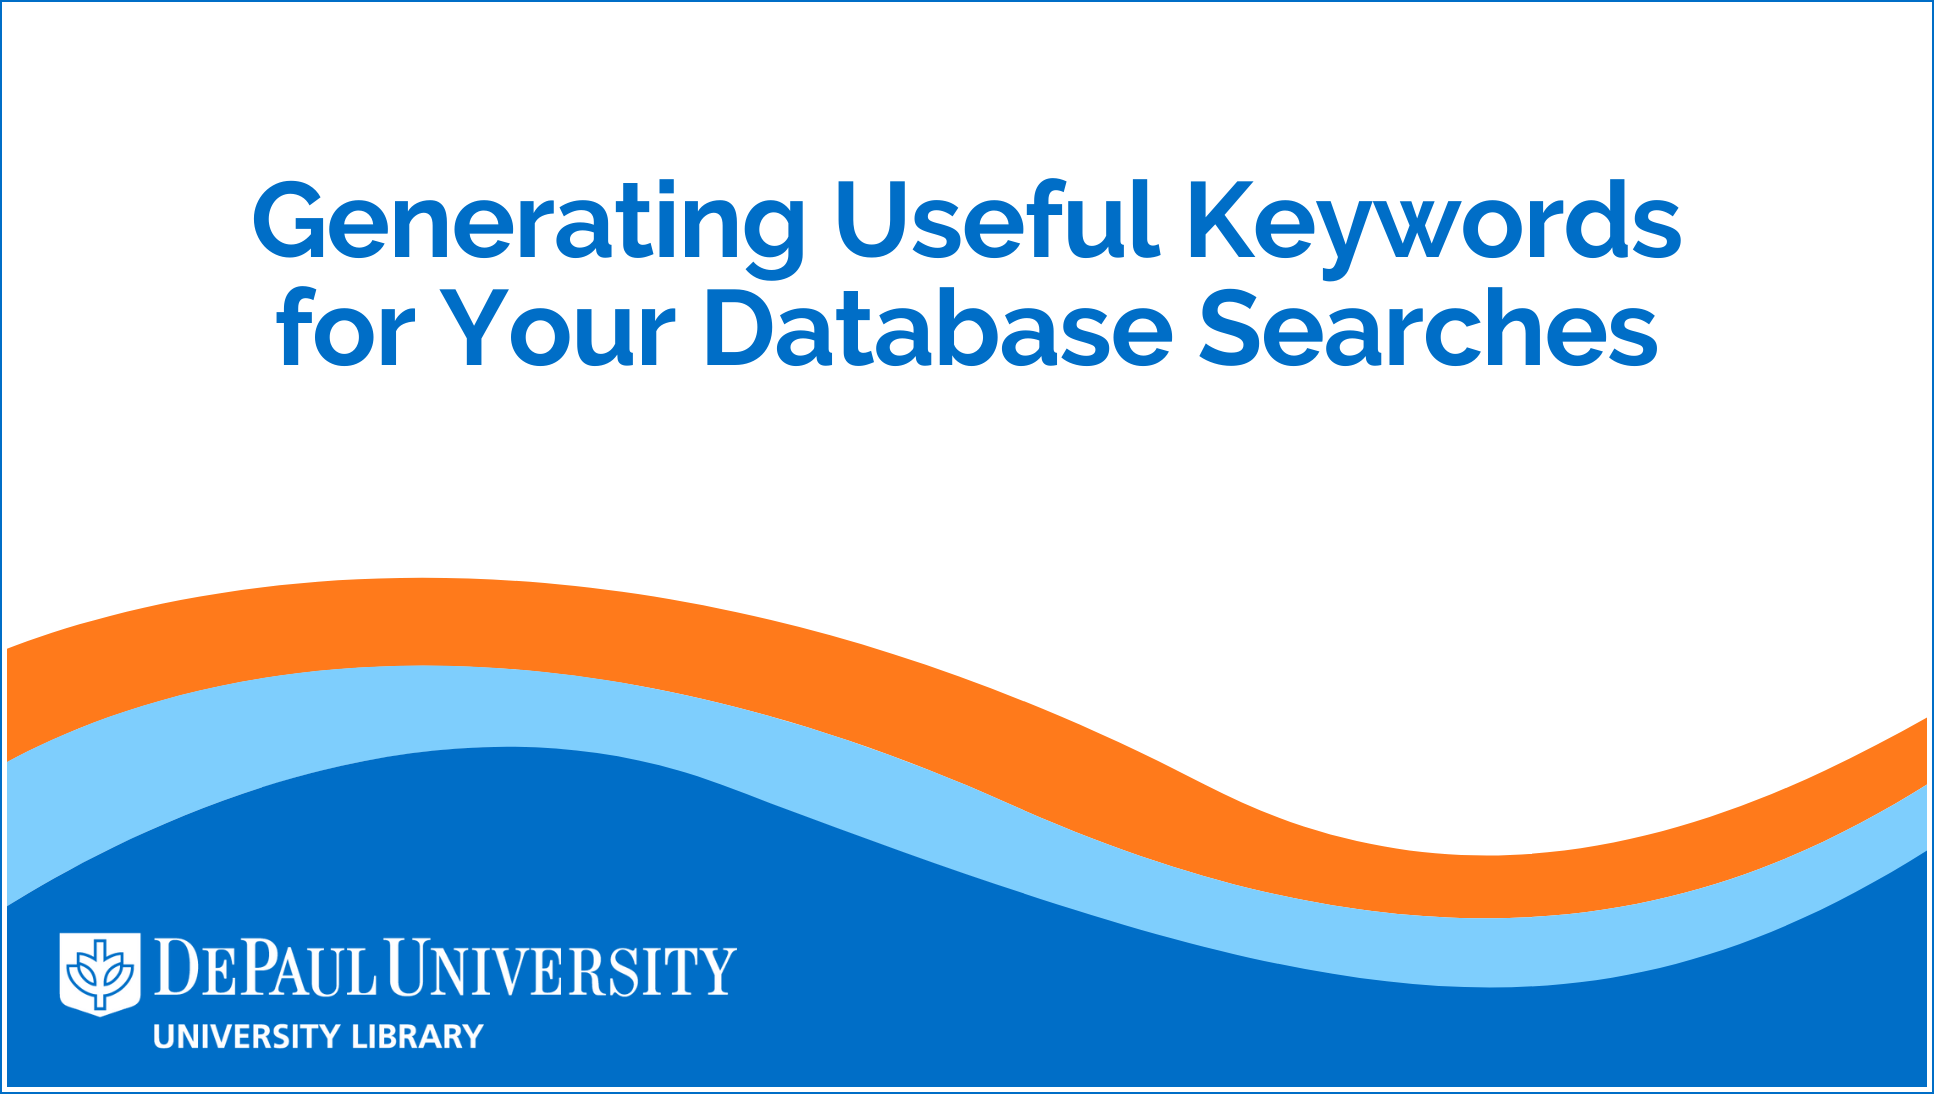 Generating Useful Keywords for Your Database Searches